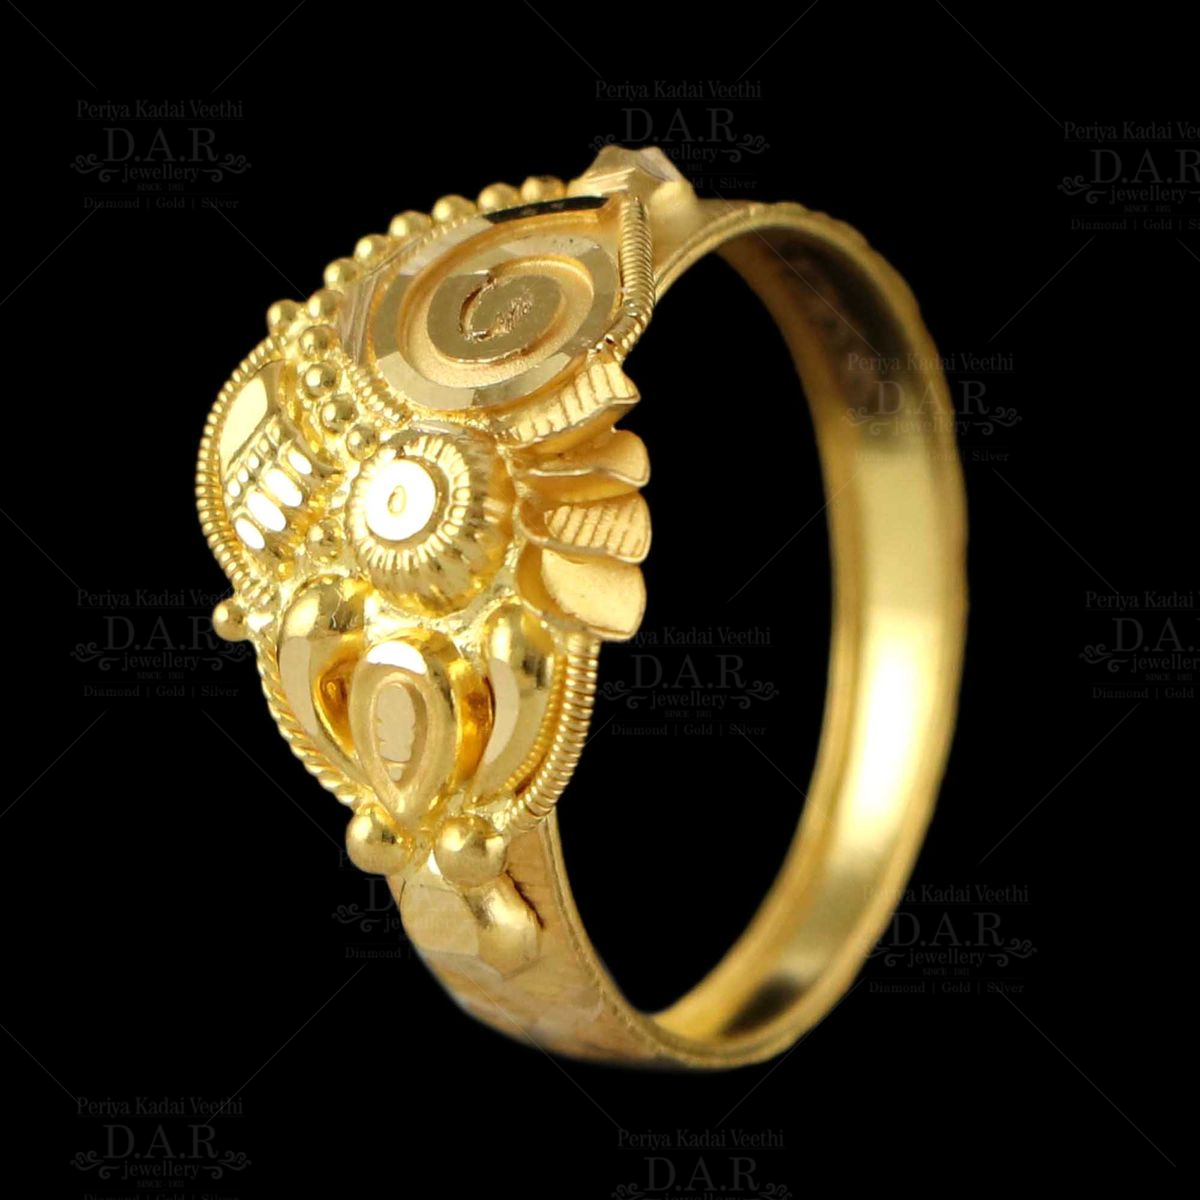 Plain Gold Wedding Rings And Bands Without Diamonds and Stones |